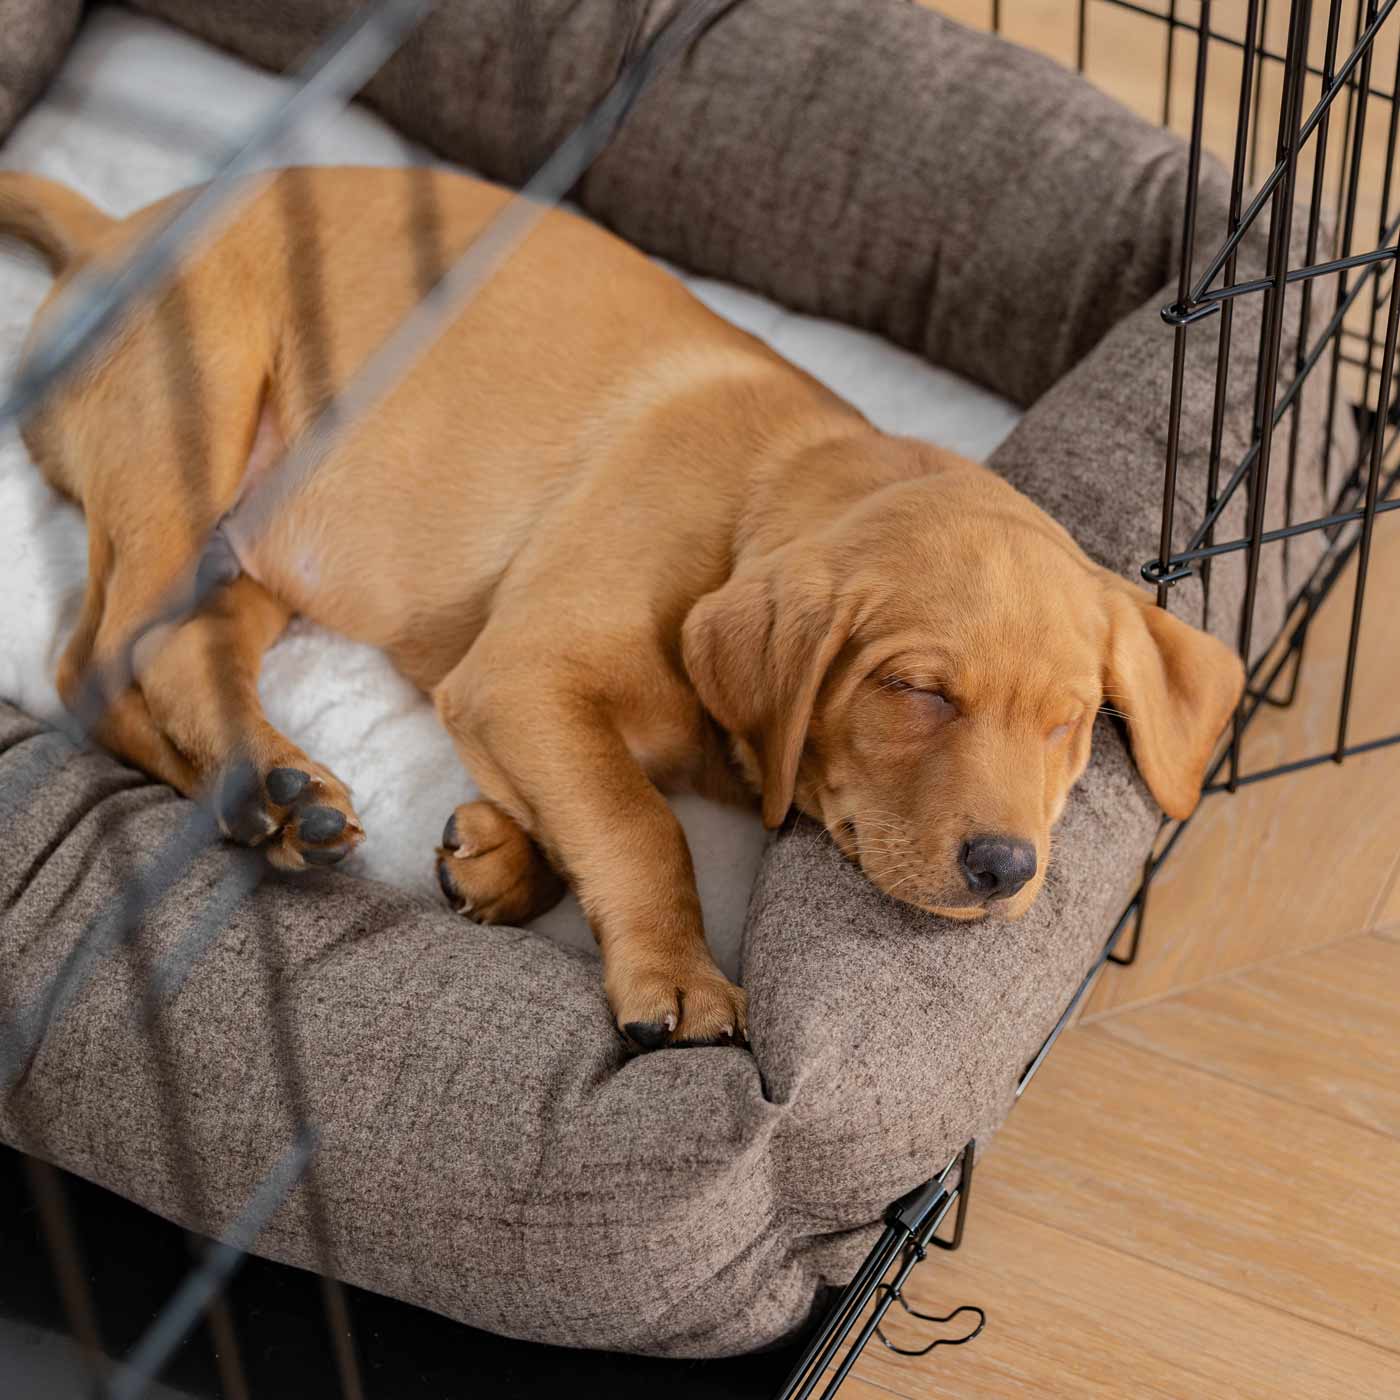 Inchmurrin Cosy & Calm Puppy Box Bed, The Perfect Dog Crate Bed For Pets! To Build The Ultimate Dog Den! In Brown Ember! Available To Personalise Now at Lords & Labradors 